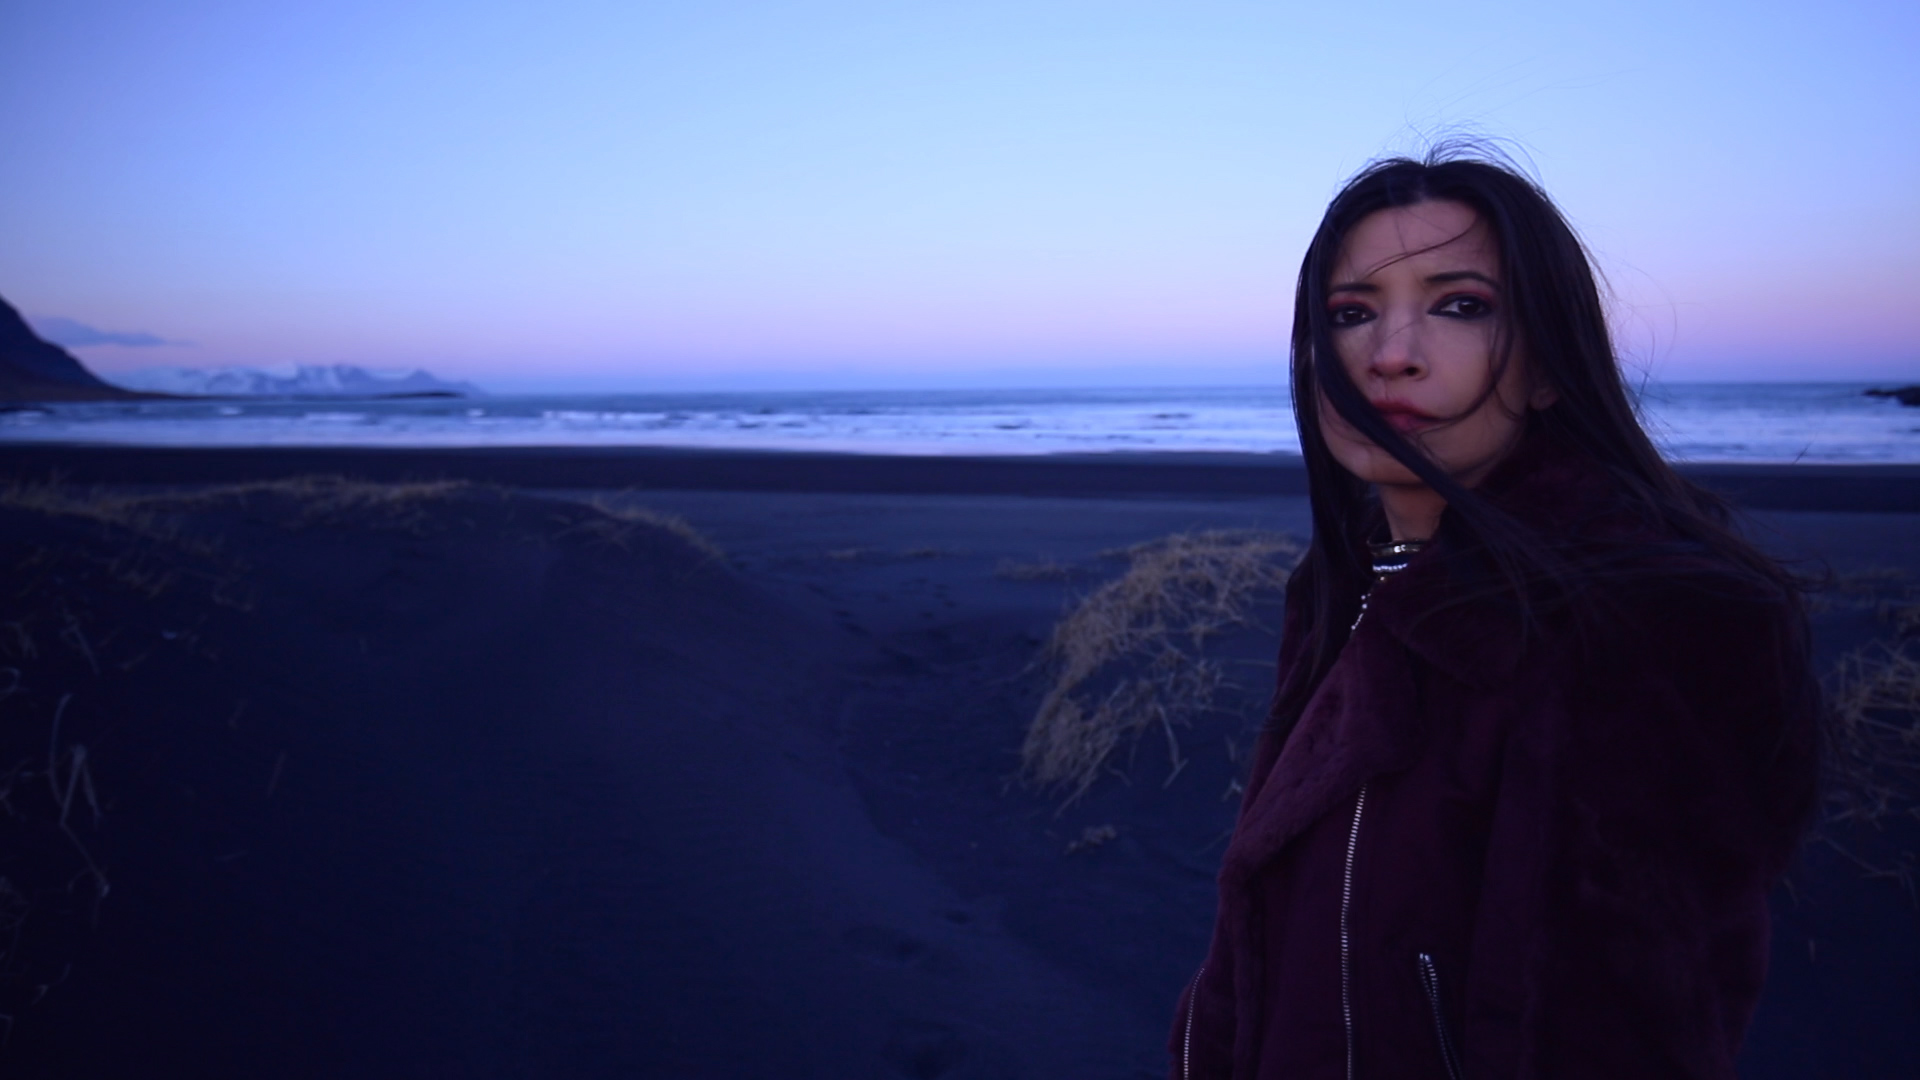 Francesca Miccoli on location in Iceland on the black sand beach Filming Angels and Demons watch the video now on youtube